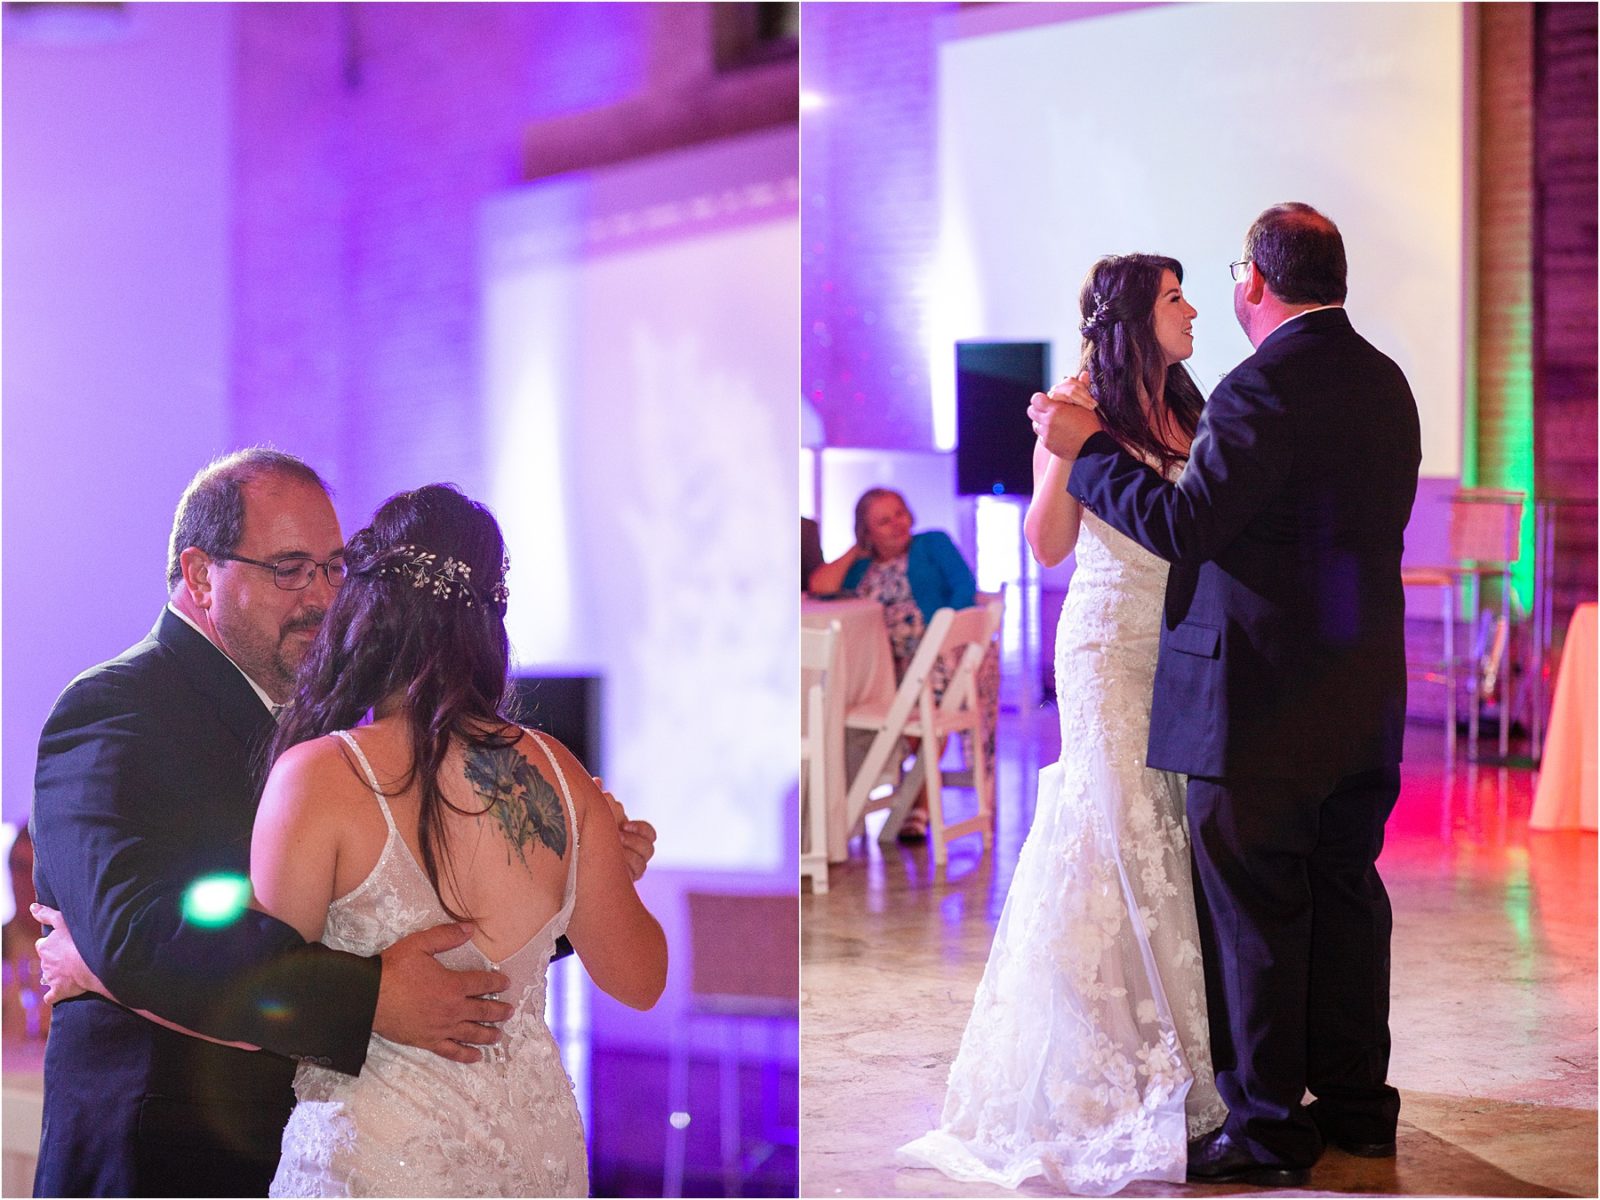 Father dances with his daughter at wedding